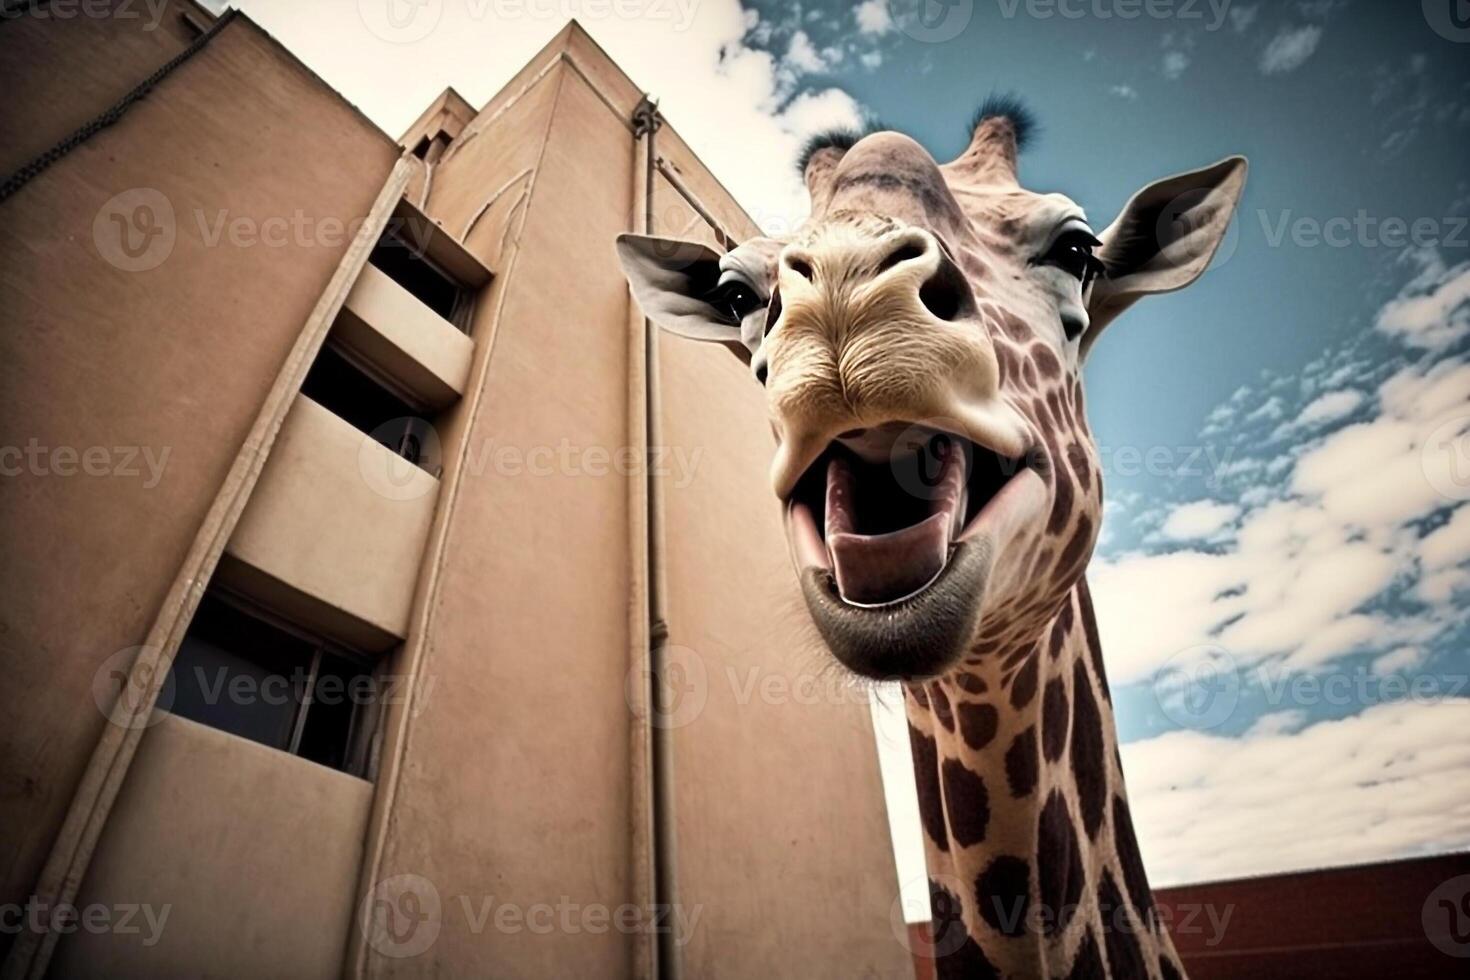 giraffe on the background of the house looks into the camera illustration photo